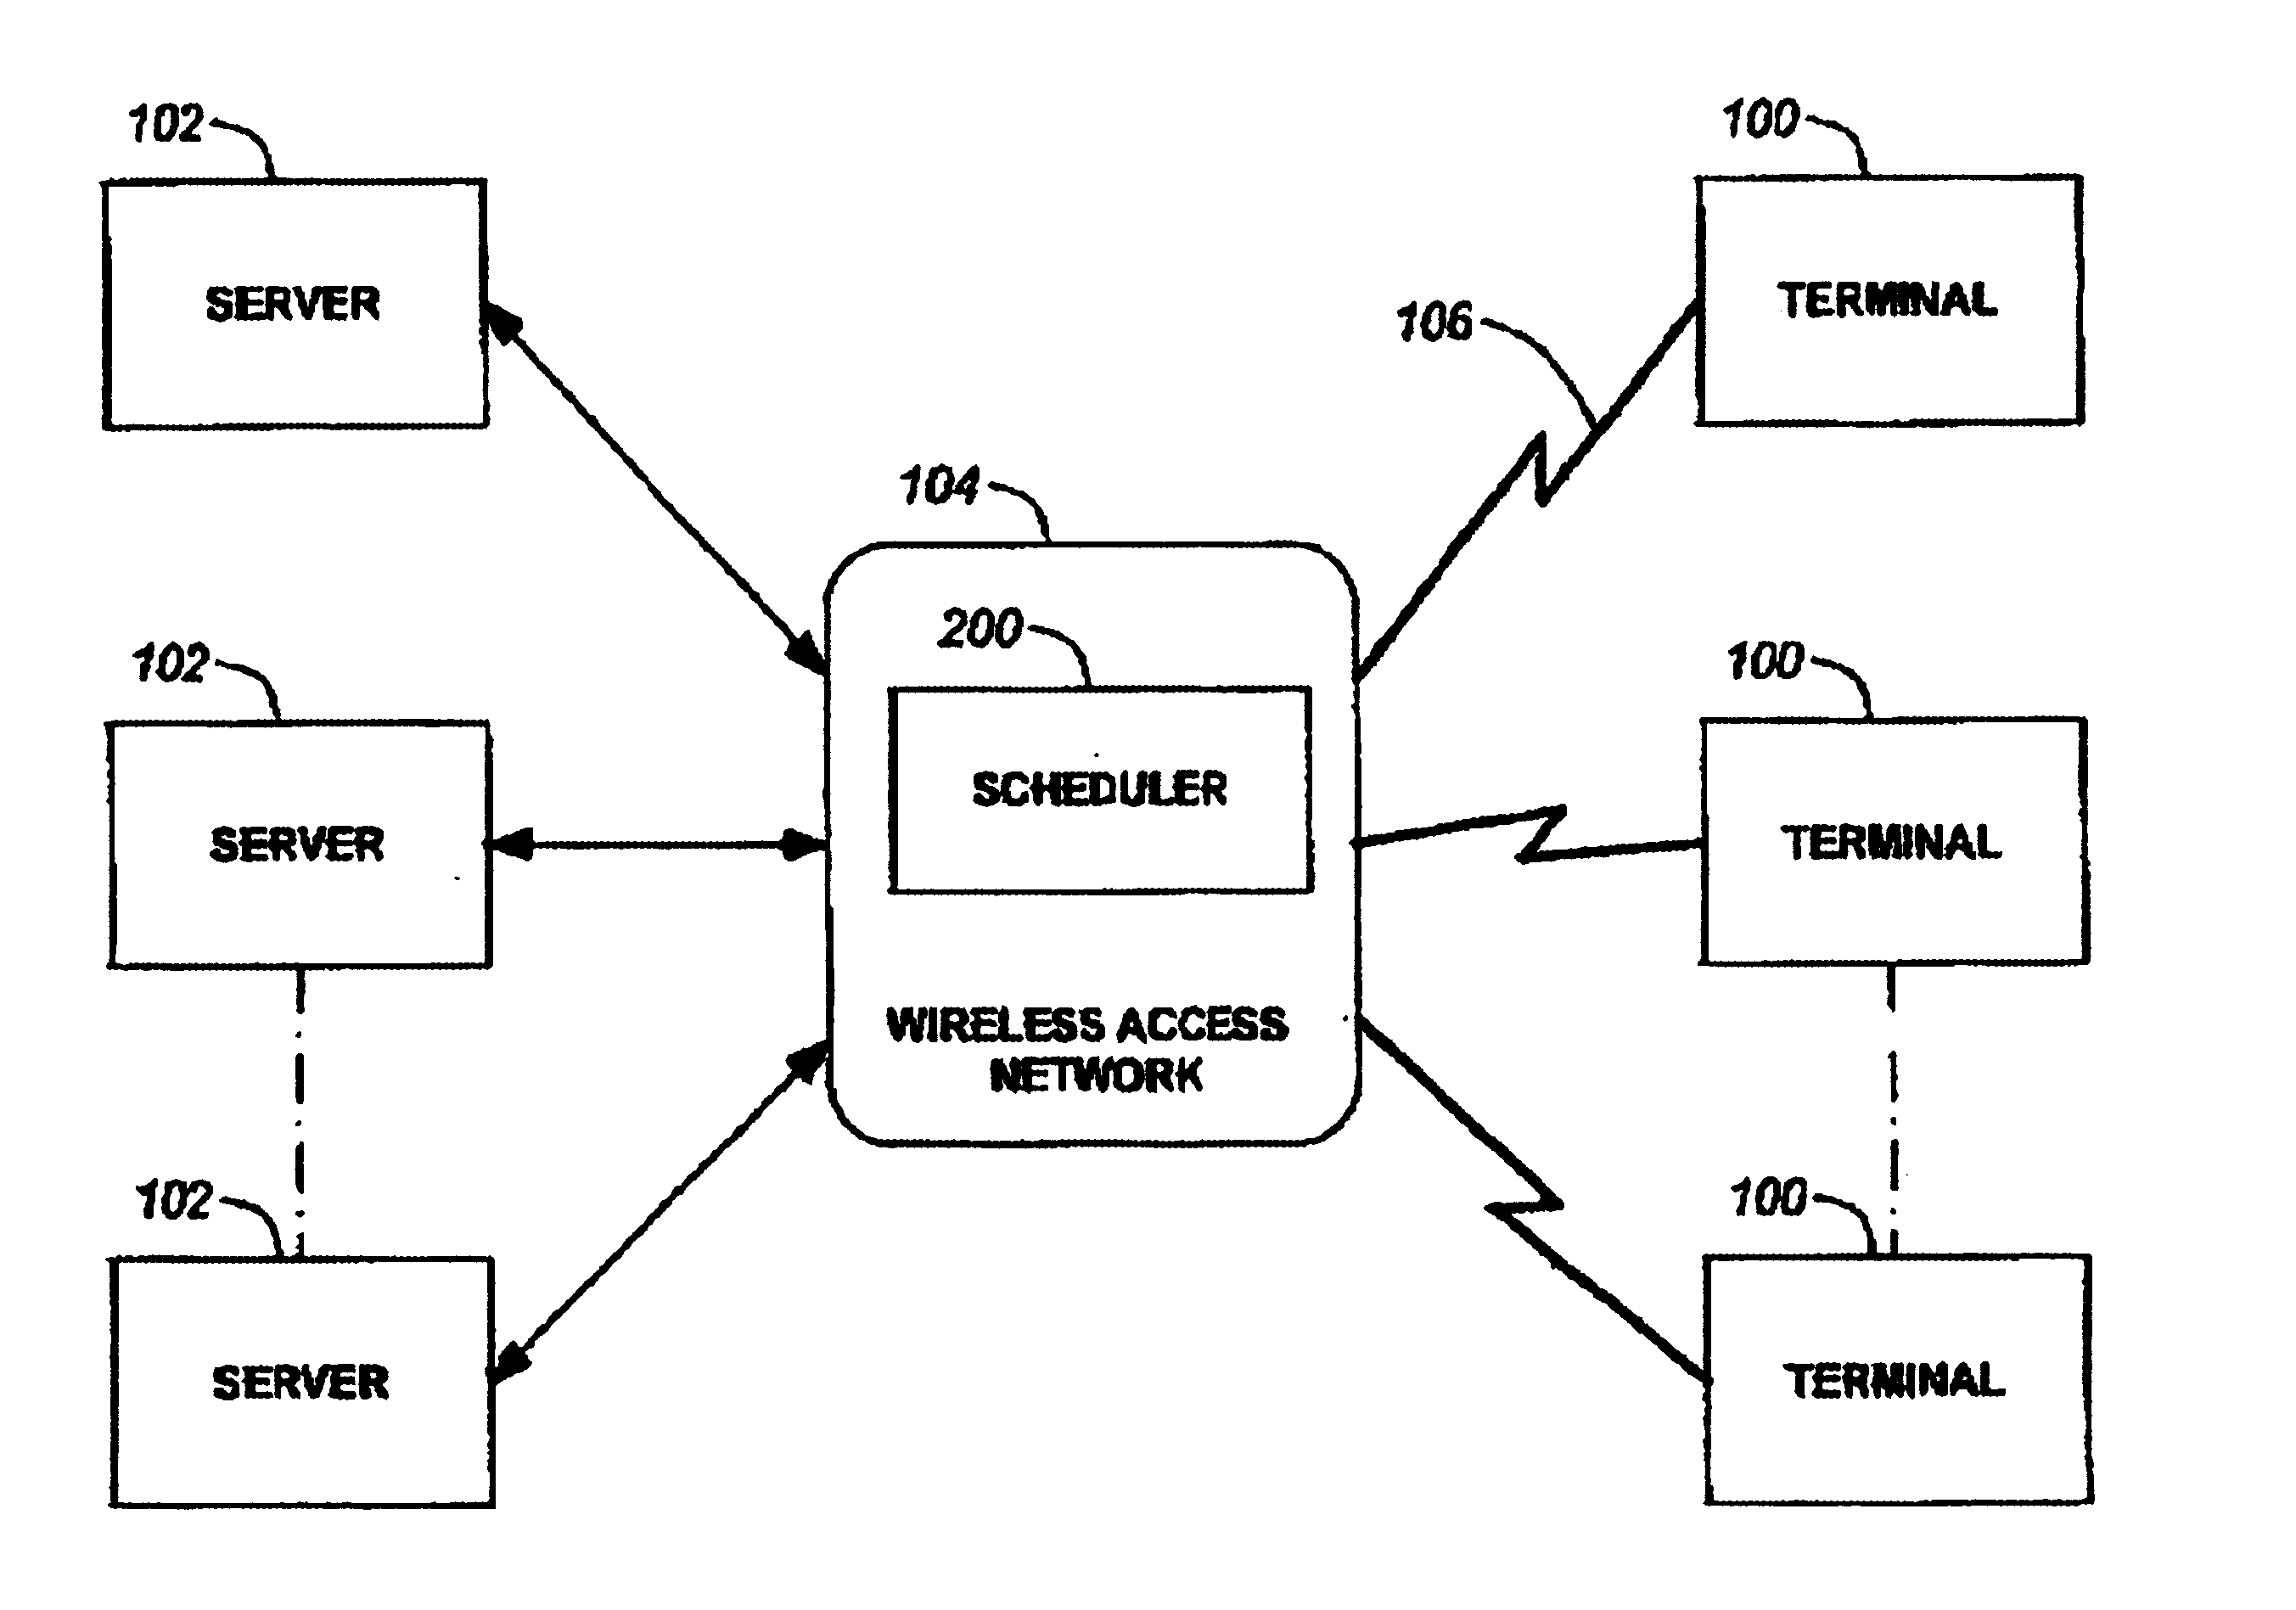 Method and system for wireless packet scheduling with per packet QoS support and link adaptation